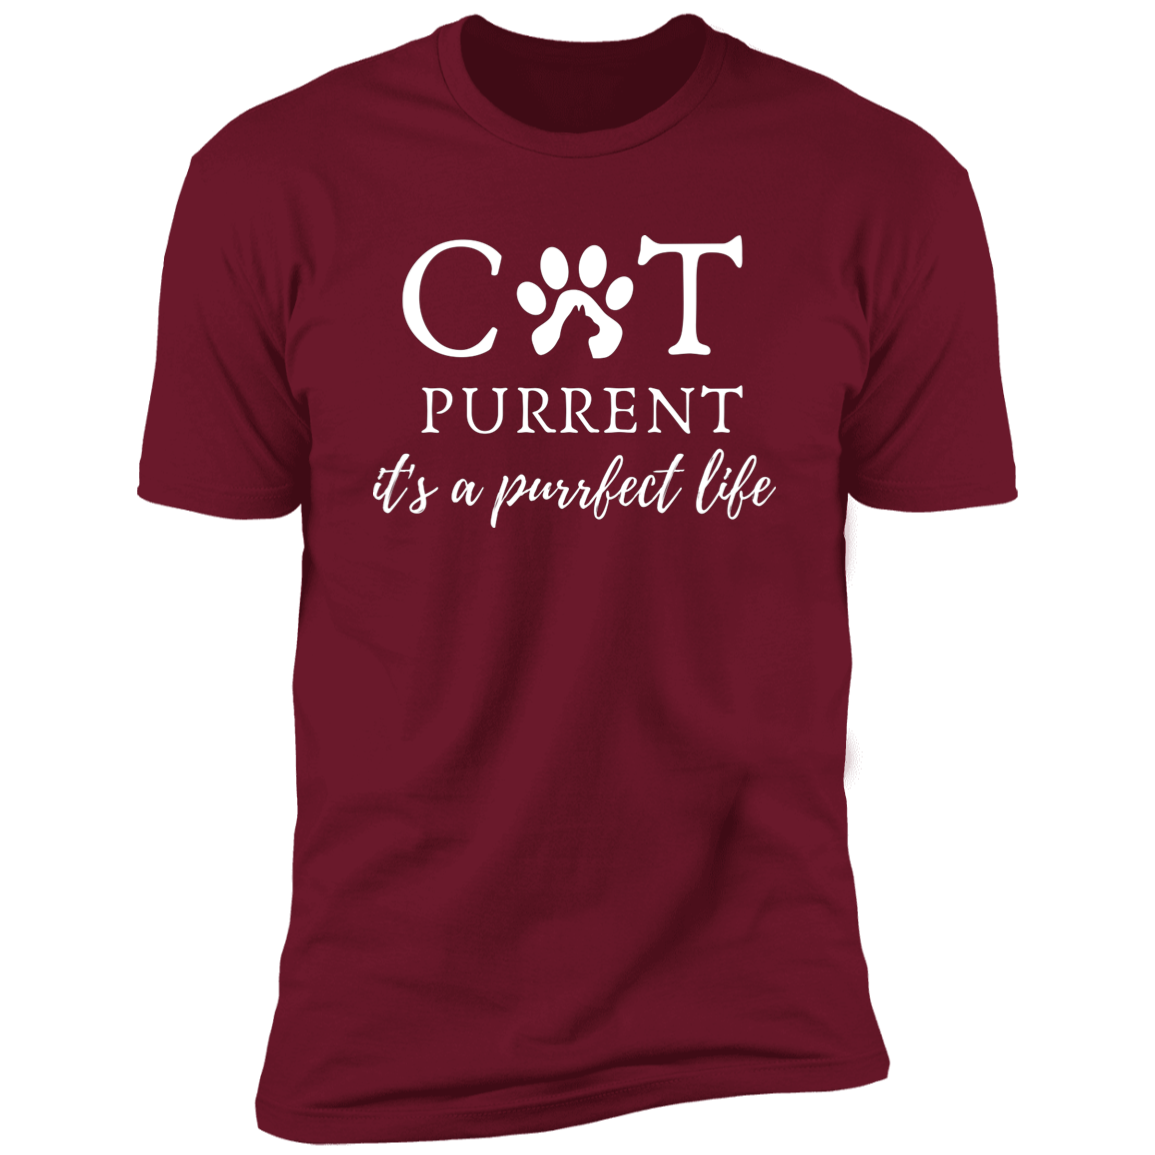 Cat Purrent It's a Purrfect Life T-shirt, Cat Parent Shirt for humans, in cardinal red